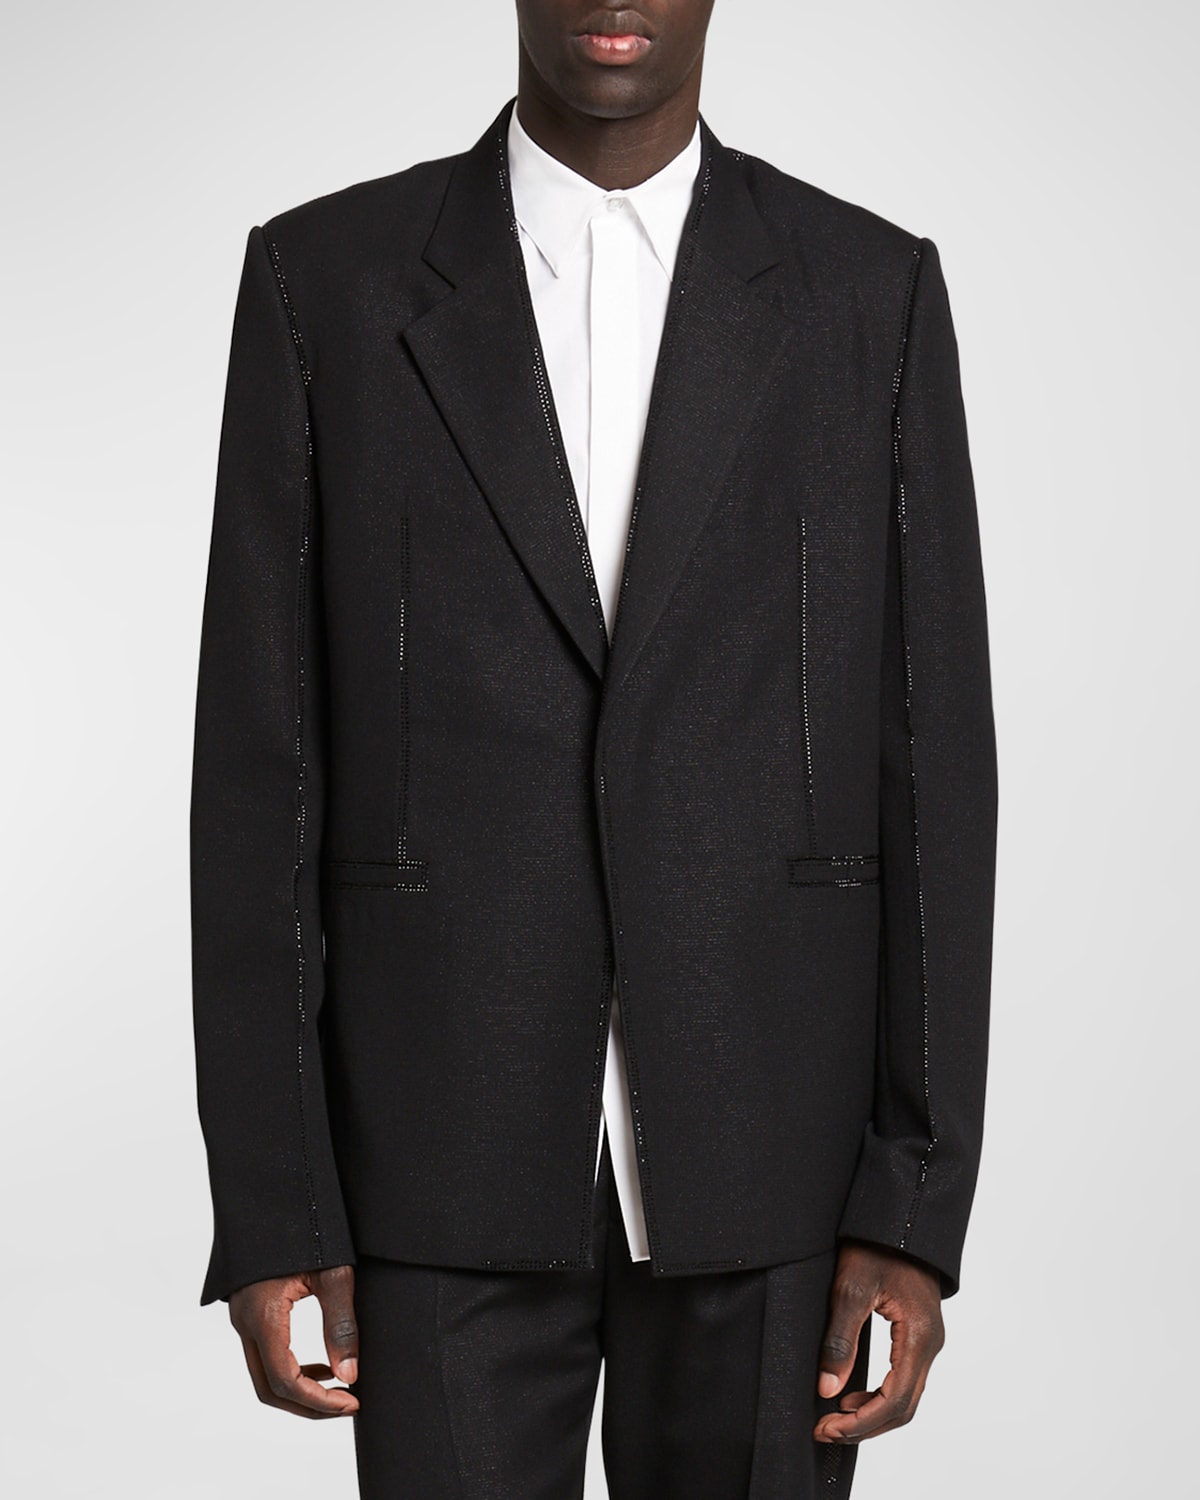 Givenchy Men's Dinner Jacket With Studded Edges In Black